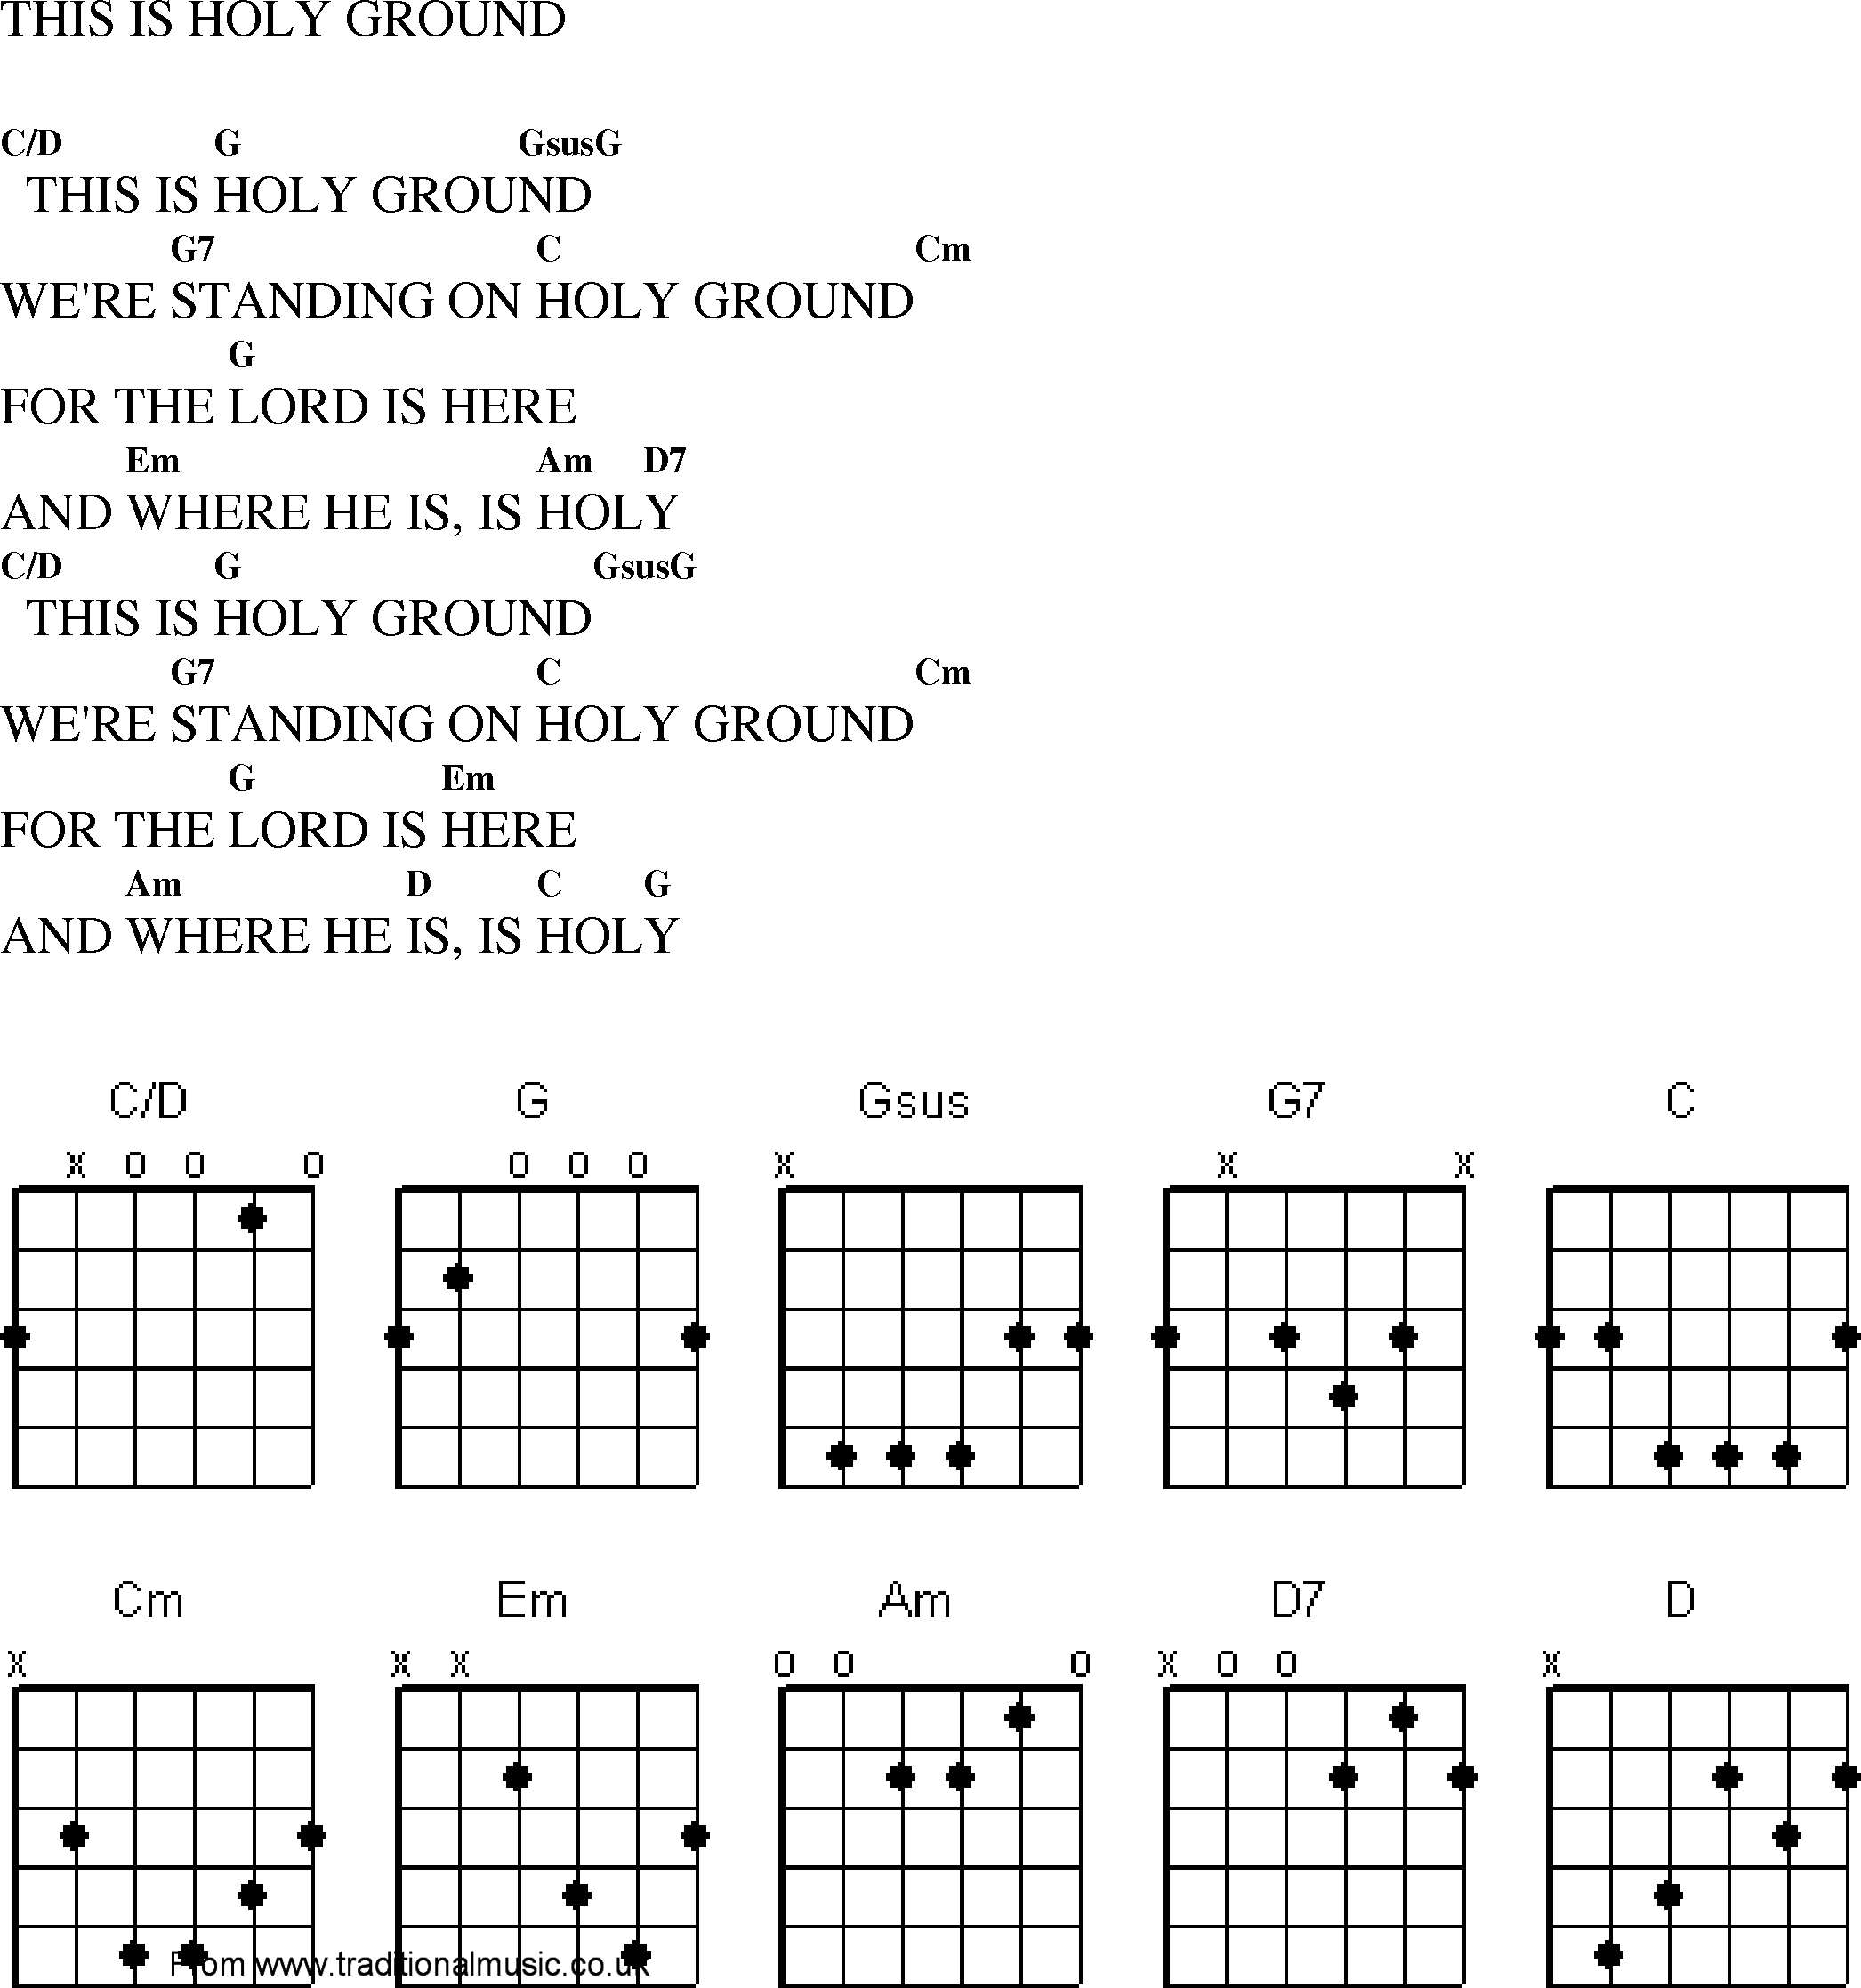 Gospel Song: this_is_holy_ground, lyrics and chords.